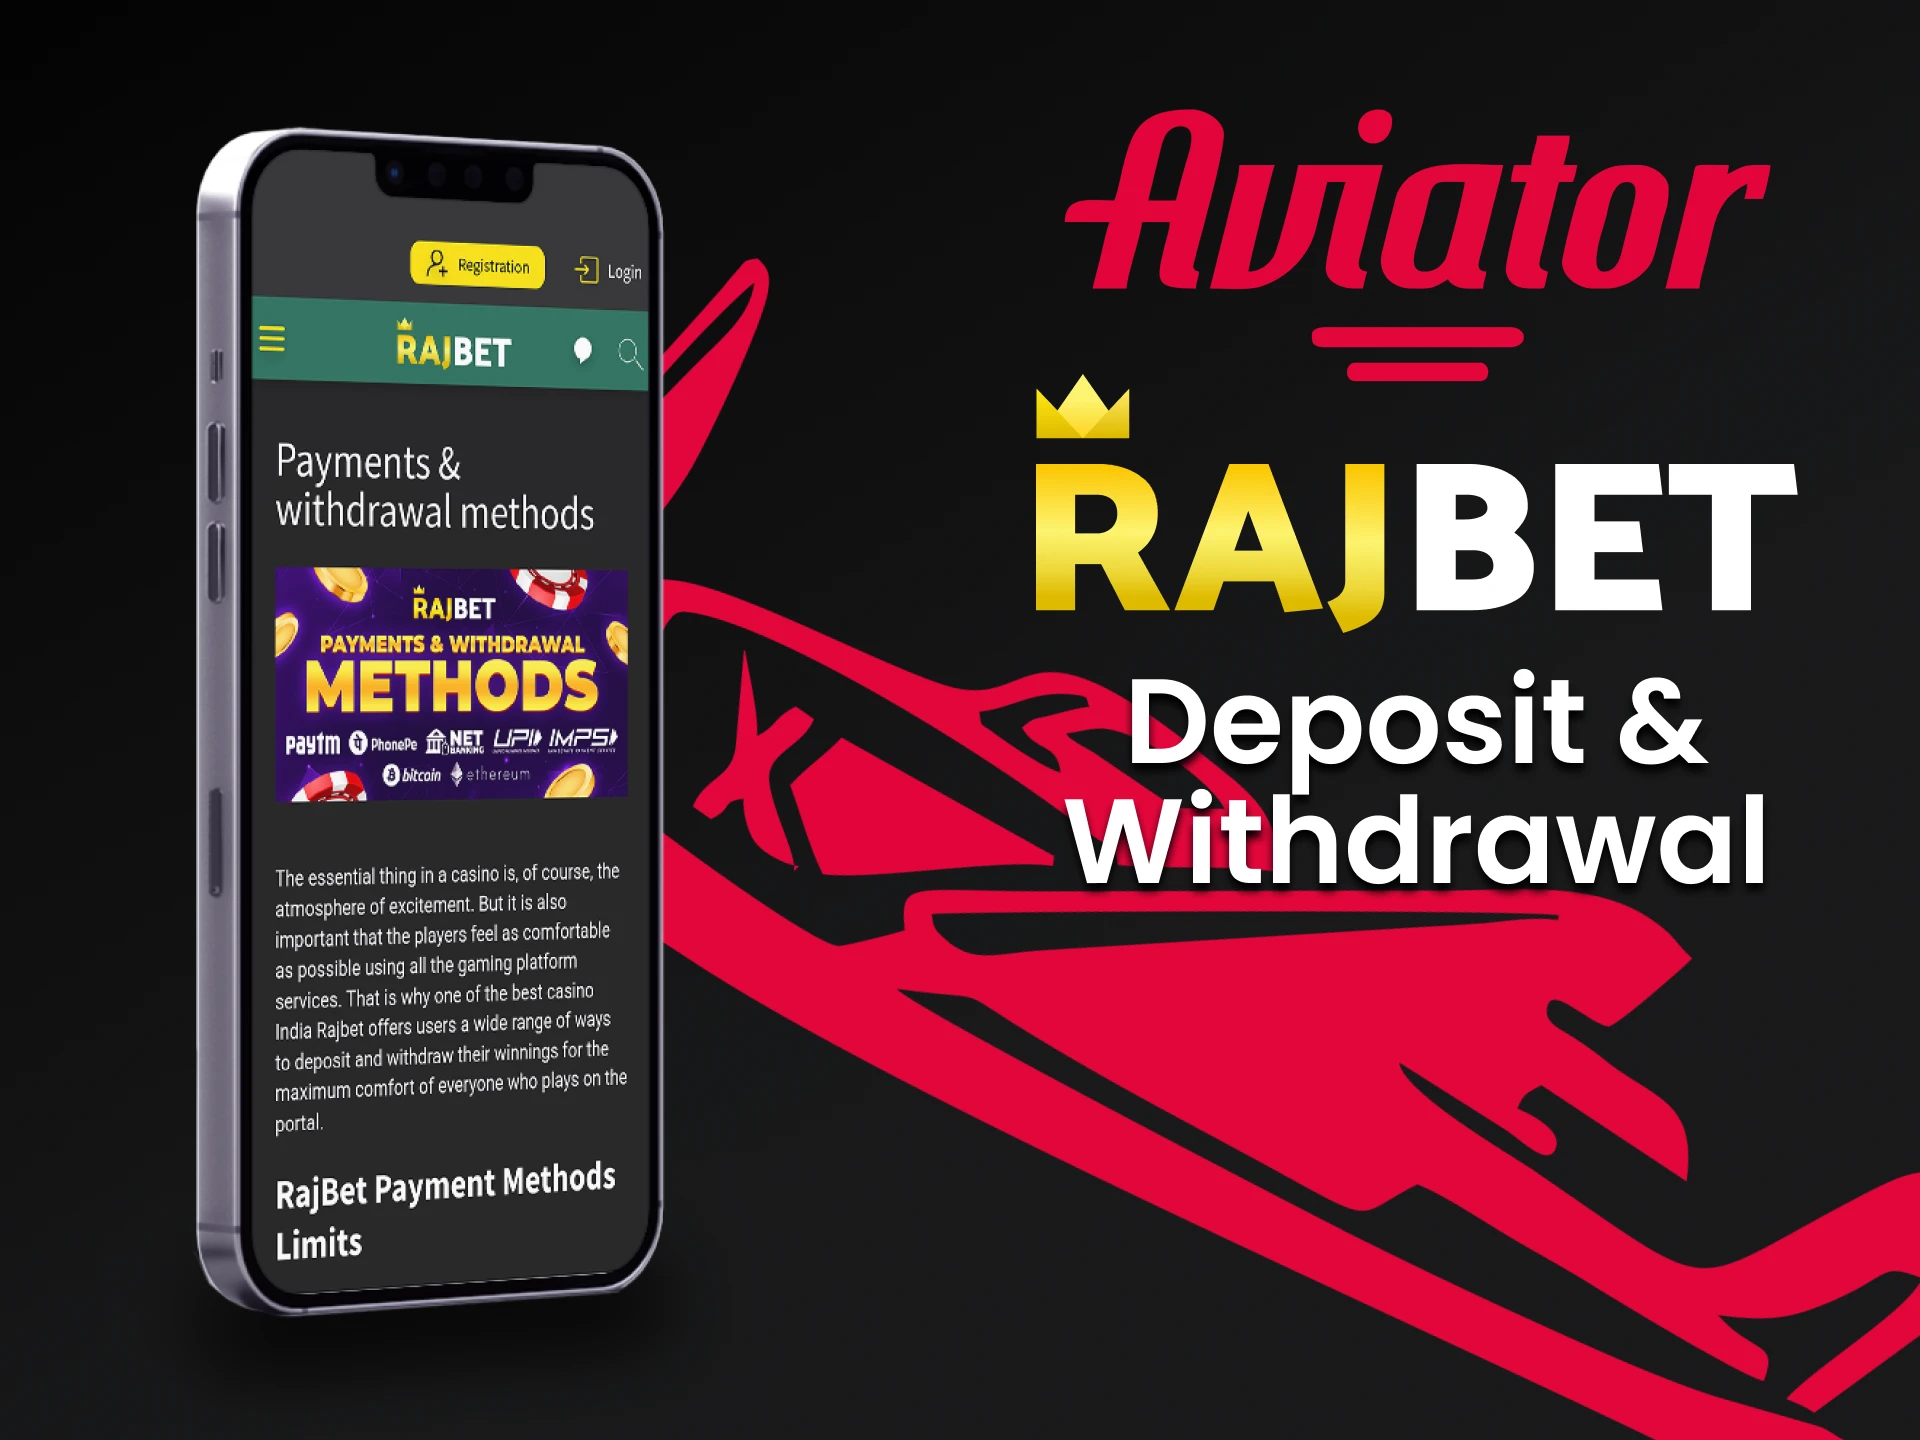 Deposit and withdraw money by using Rajbet app.